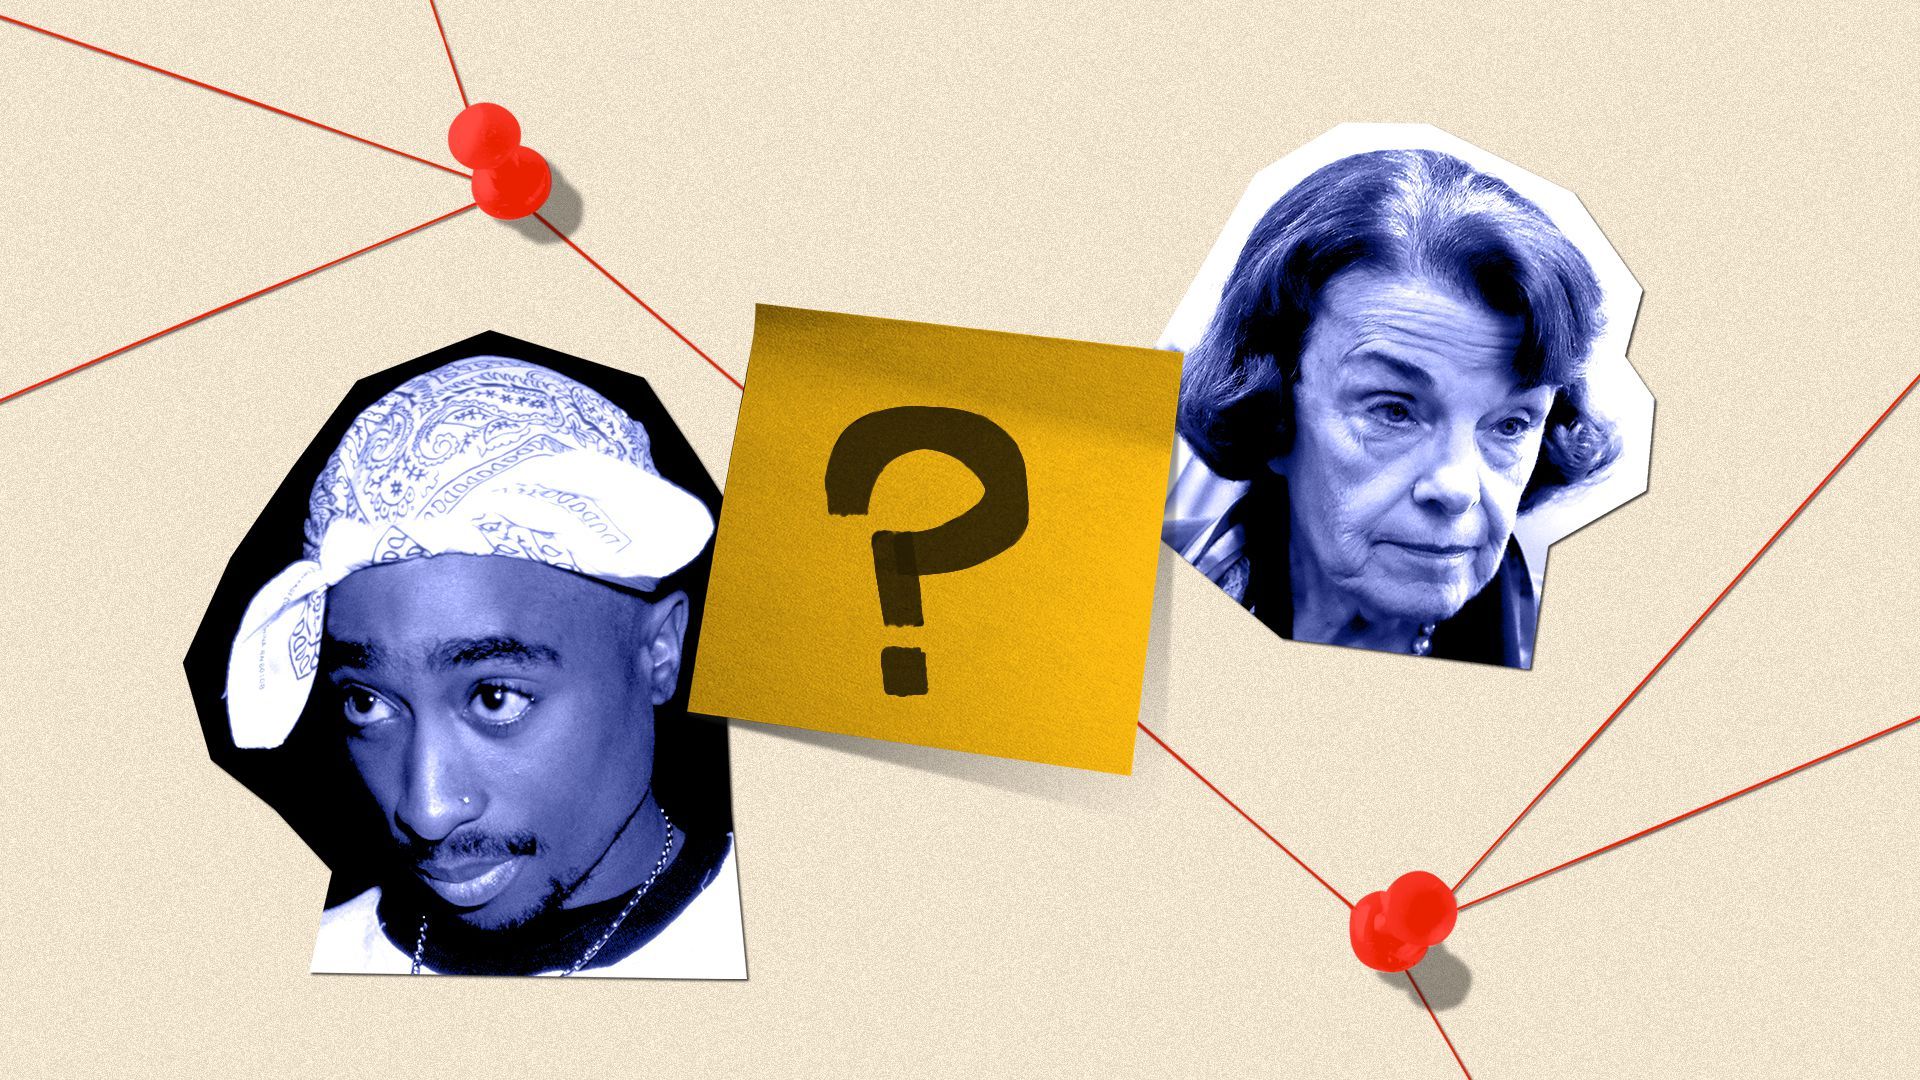 Photo illustration of cutouts of Tupac Shakur and Dianne Feinstein on a board with pins and string, and a sticky note with a question mark on it.